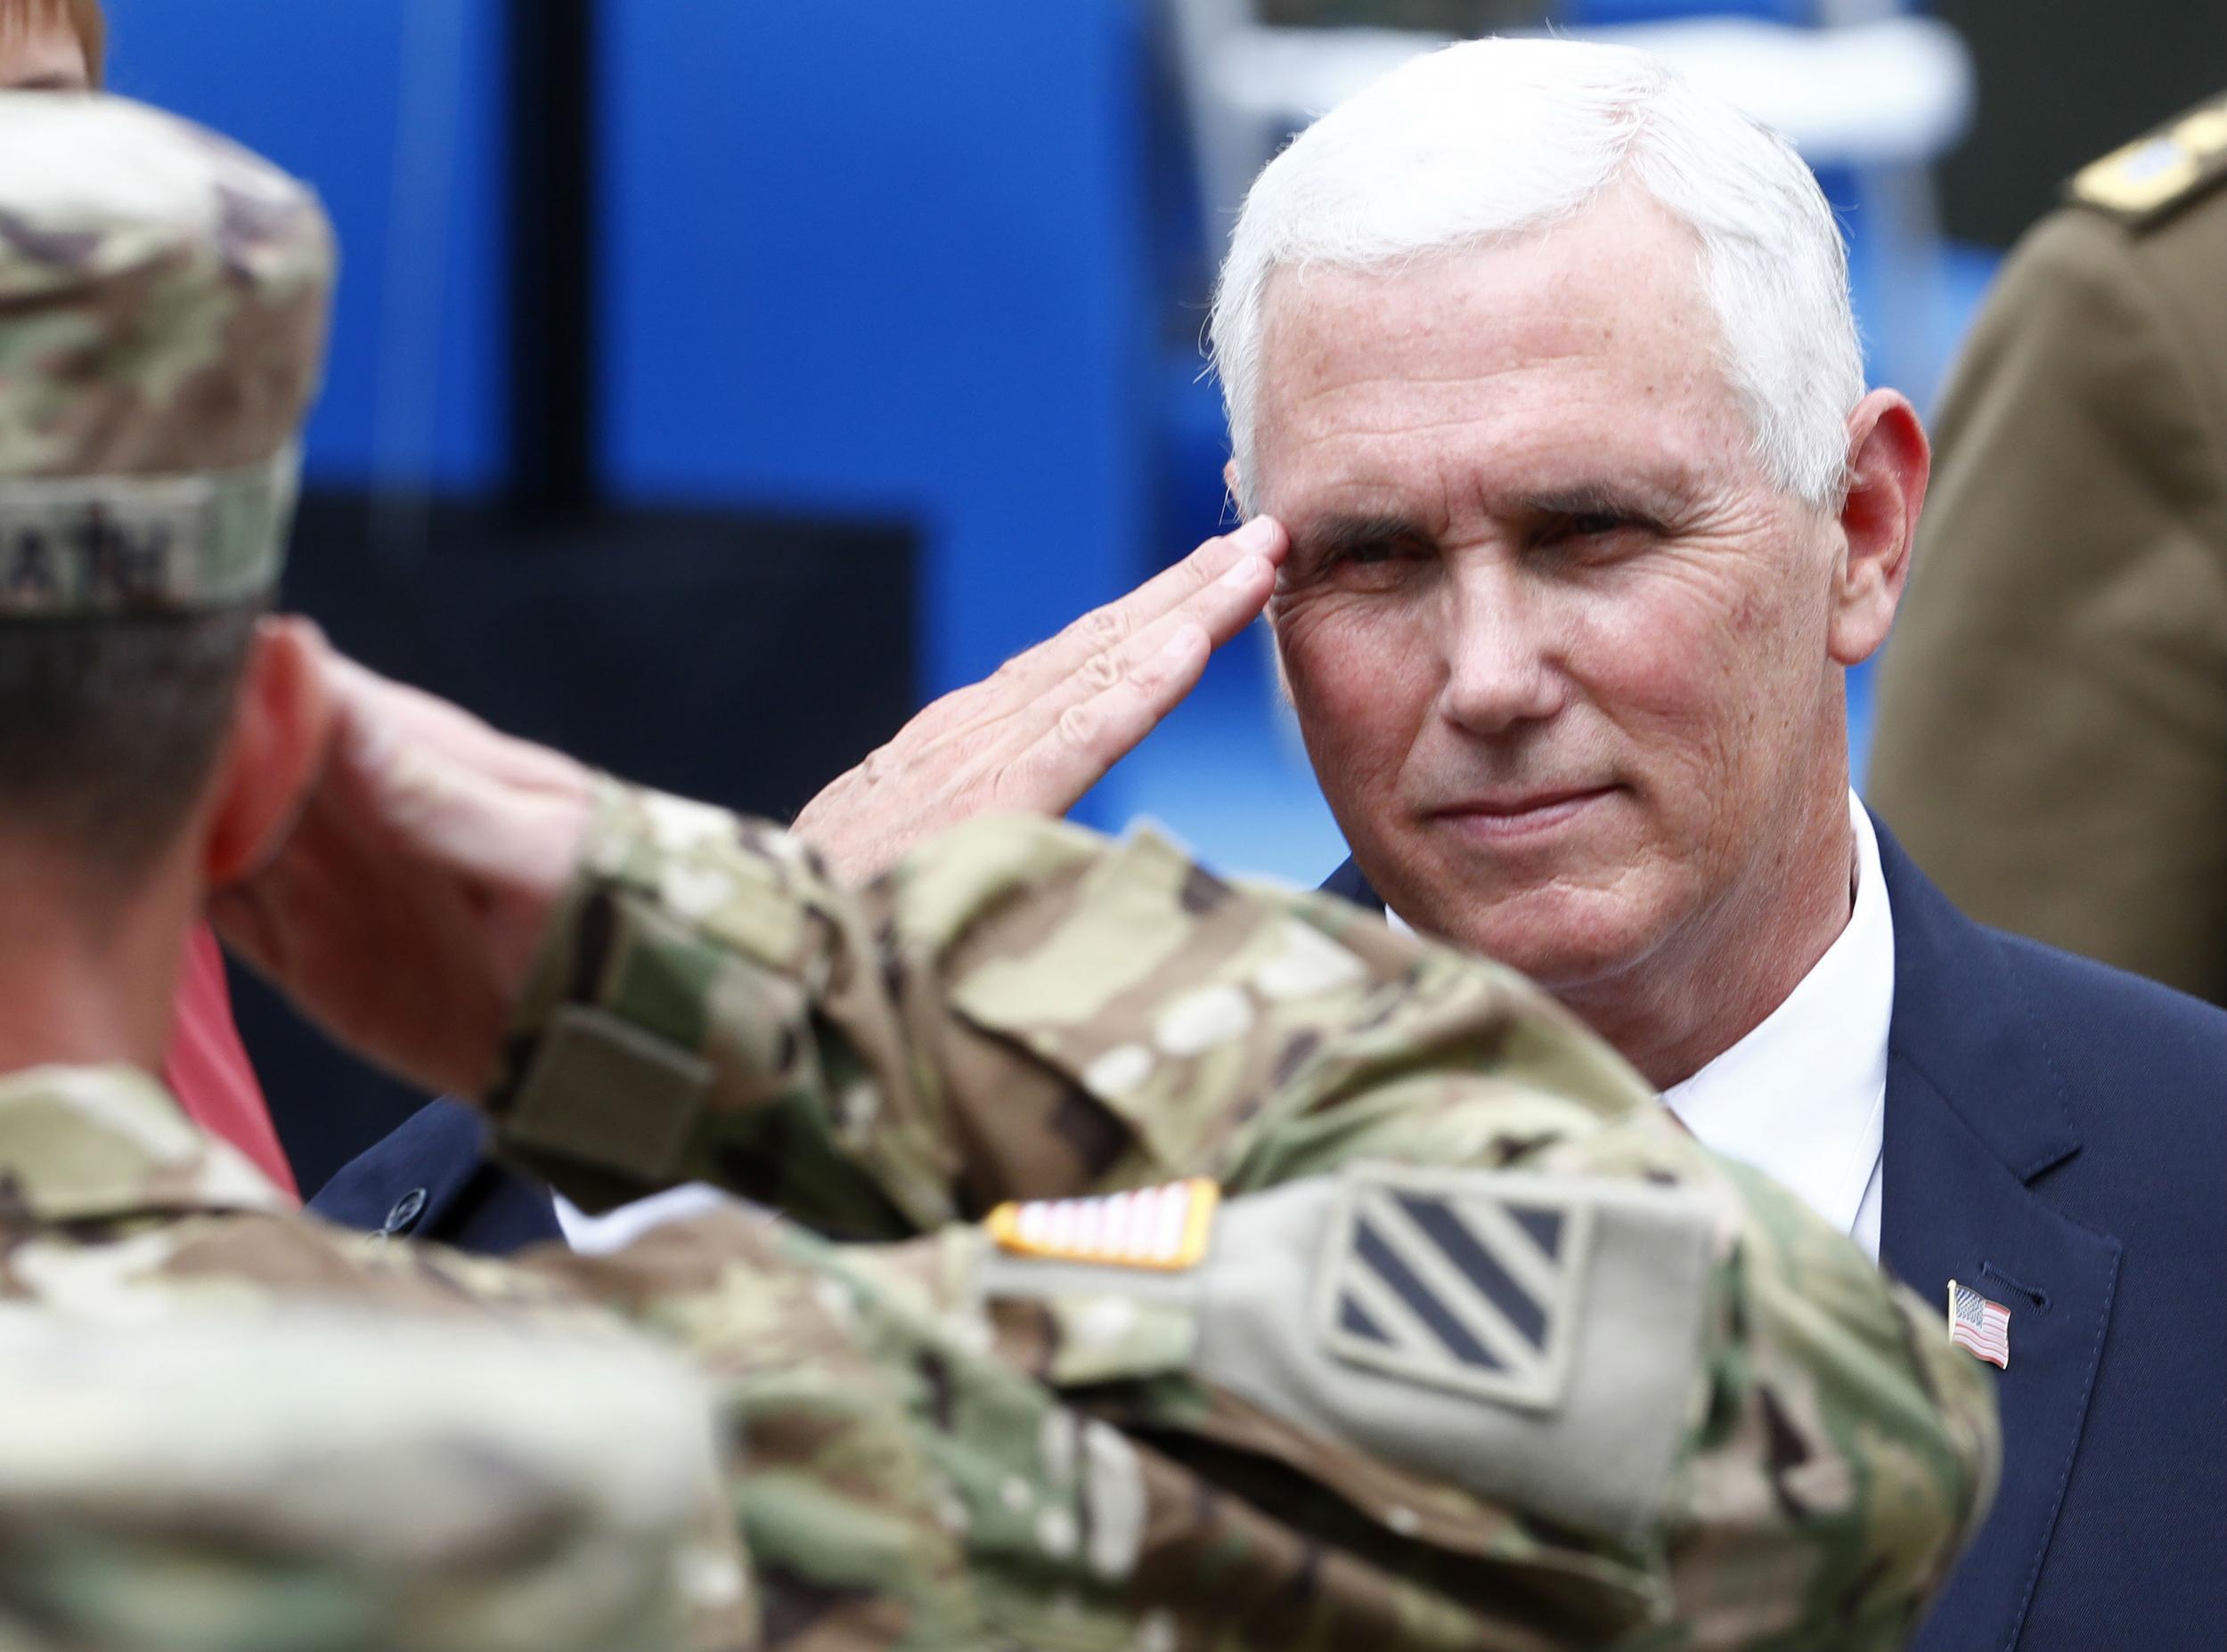 Mike Pence salutes soldiers as he visits NATO's Enhanced Forward Presence mission and Estonian troops in Tallinn, Estonia July 31, 2017